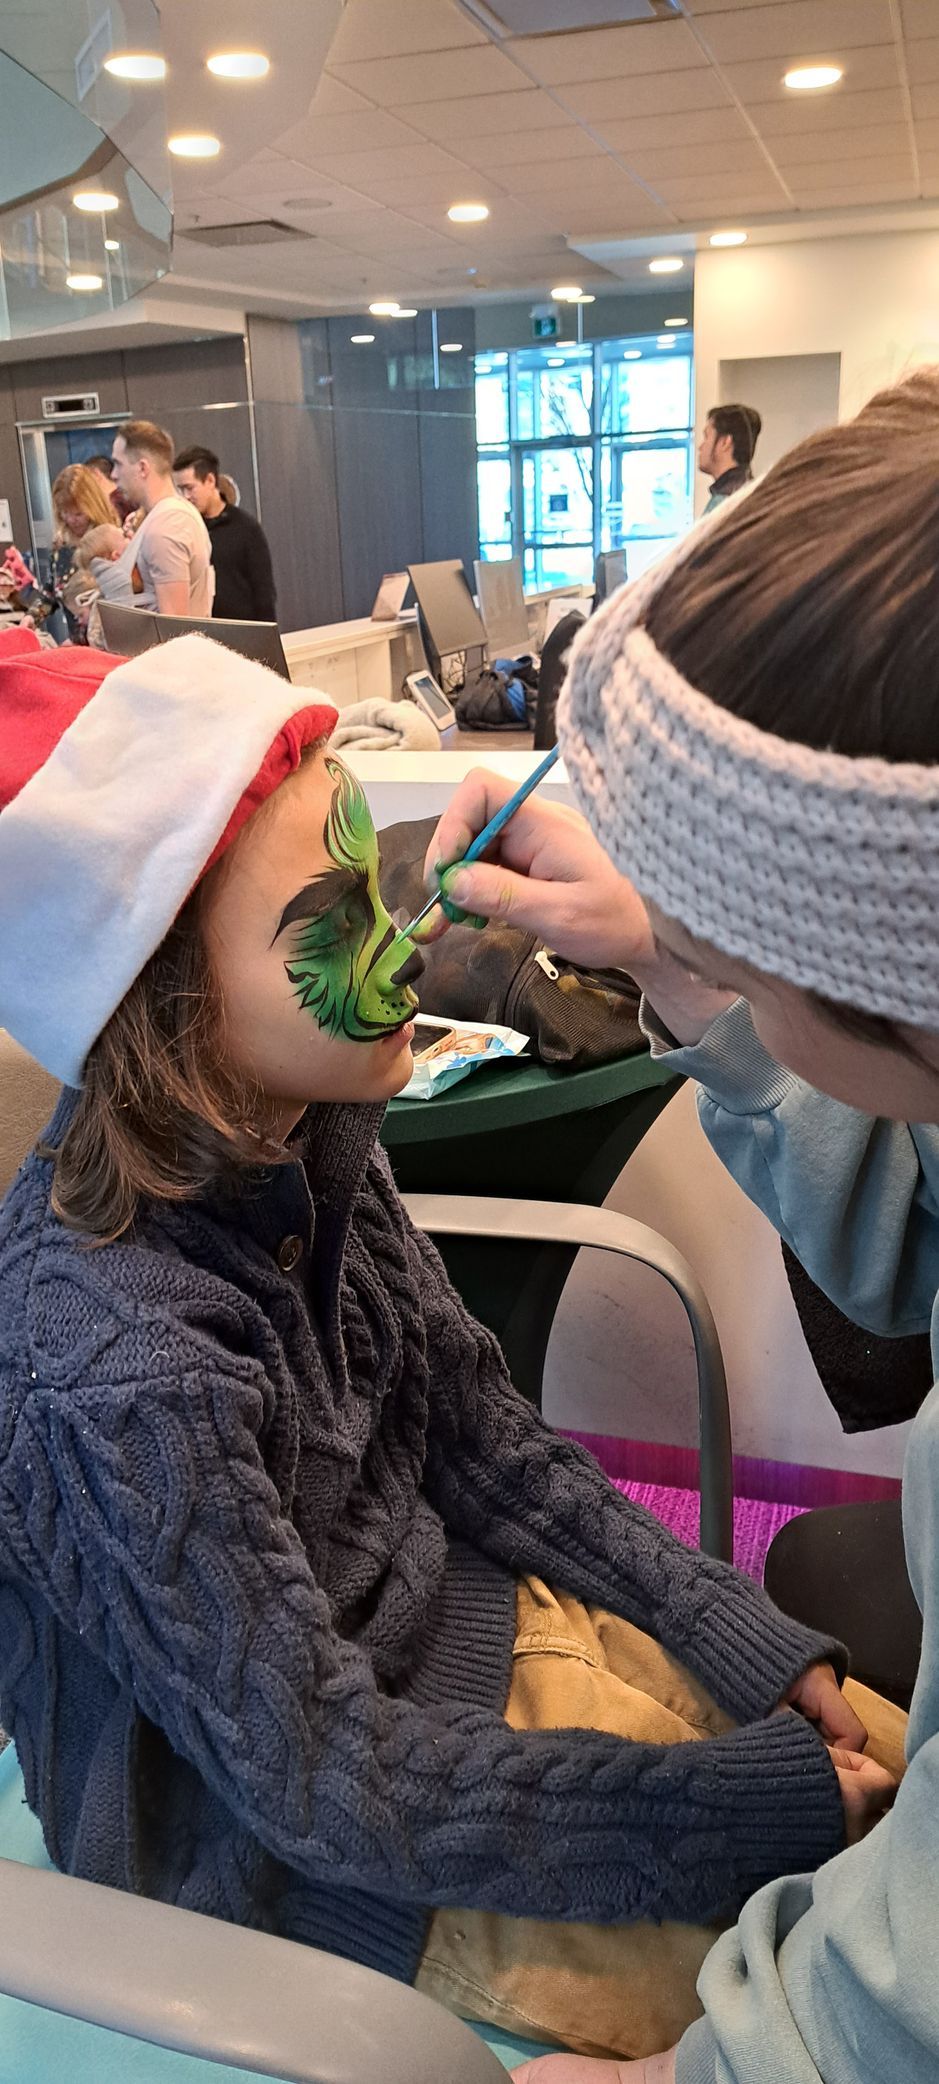 face painter painting child's face at children's corporate holiday party